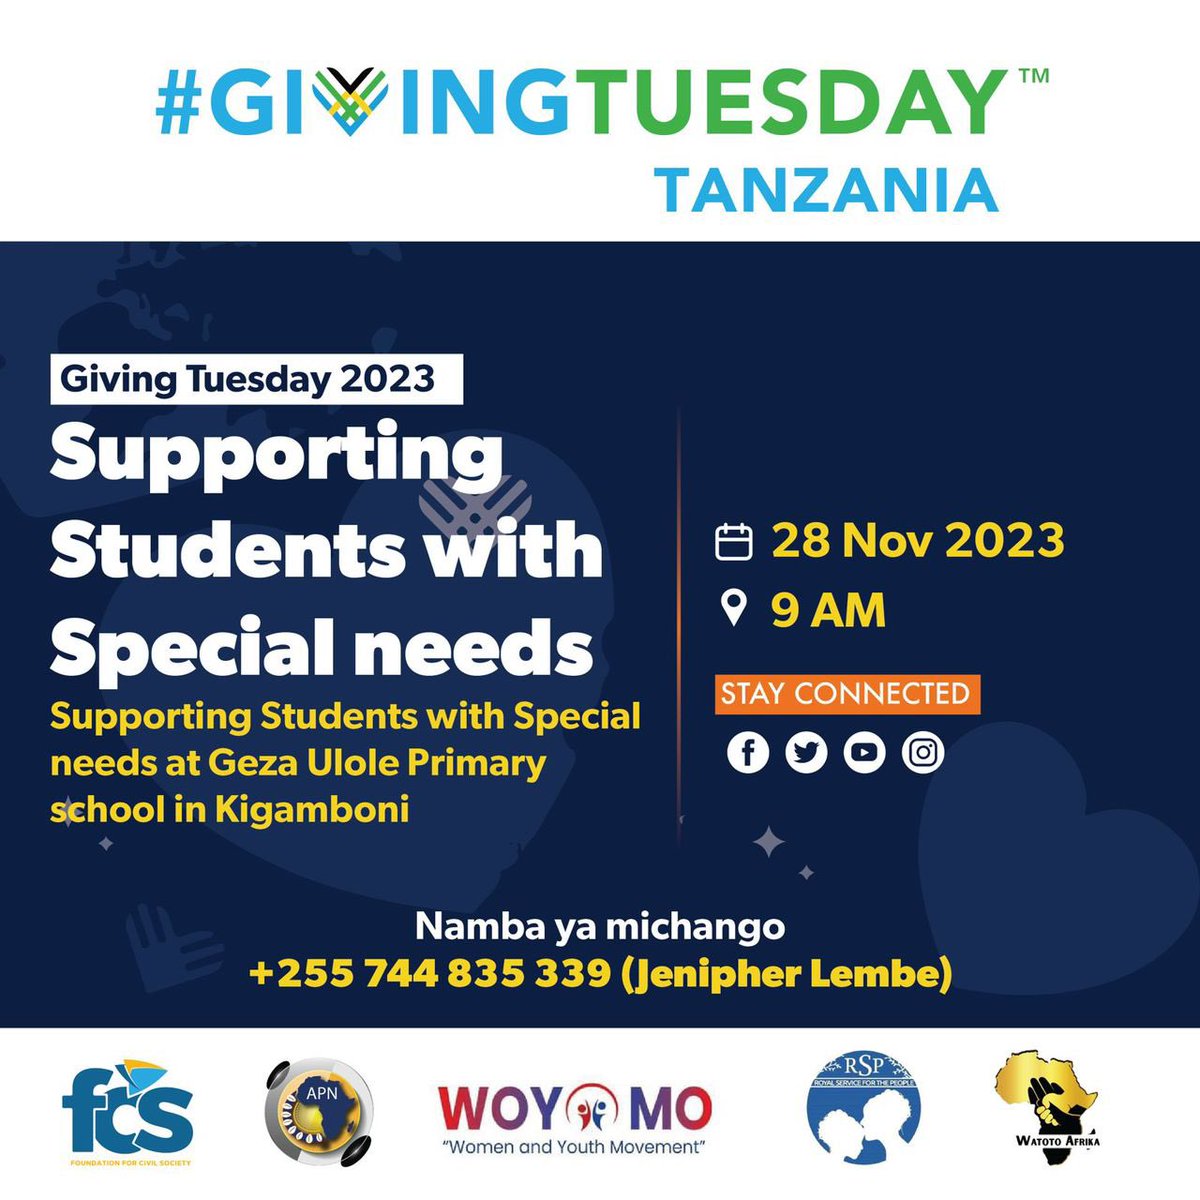 Supporting Students with Special needs at Geza Ulole Primary school in Kigamboni. #GivingTuesday @GivingTuesdayTZ